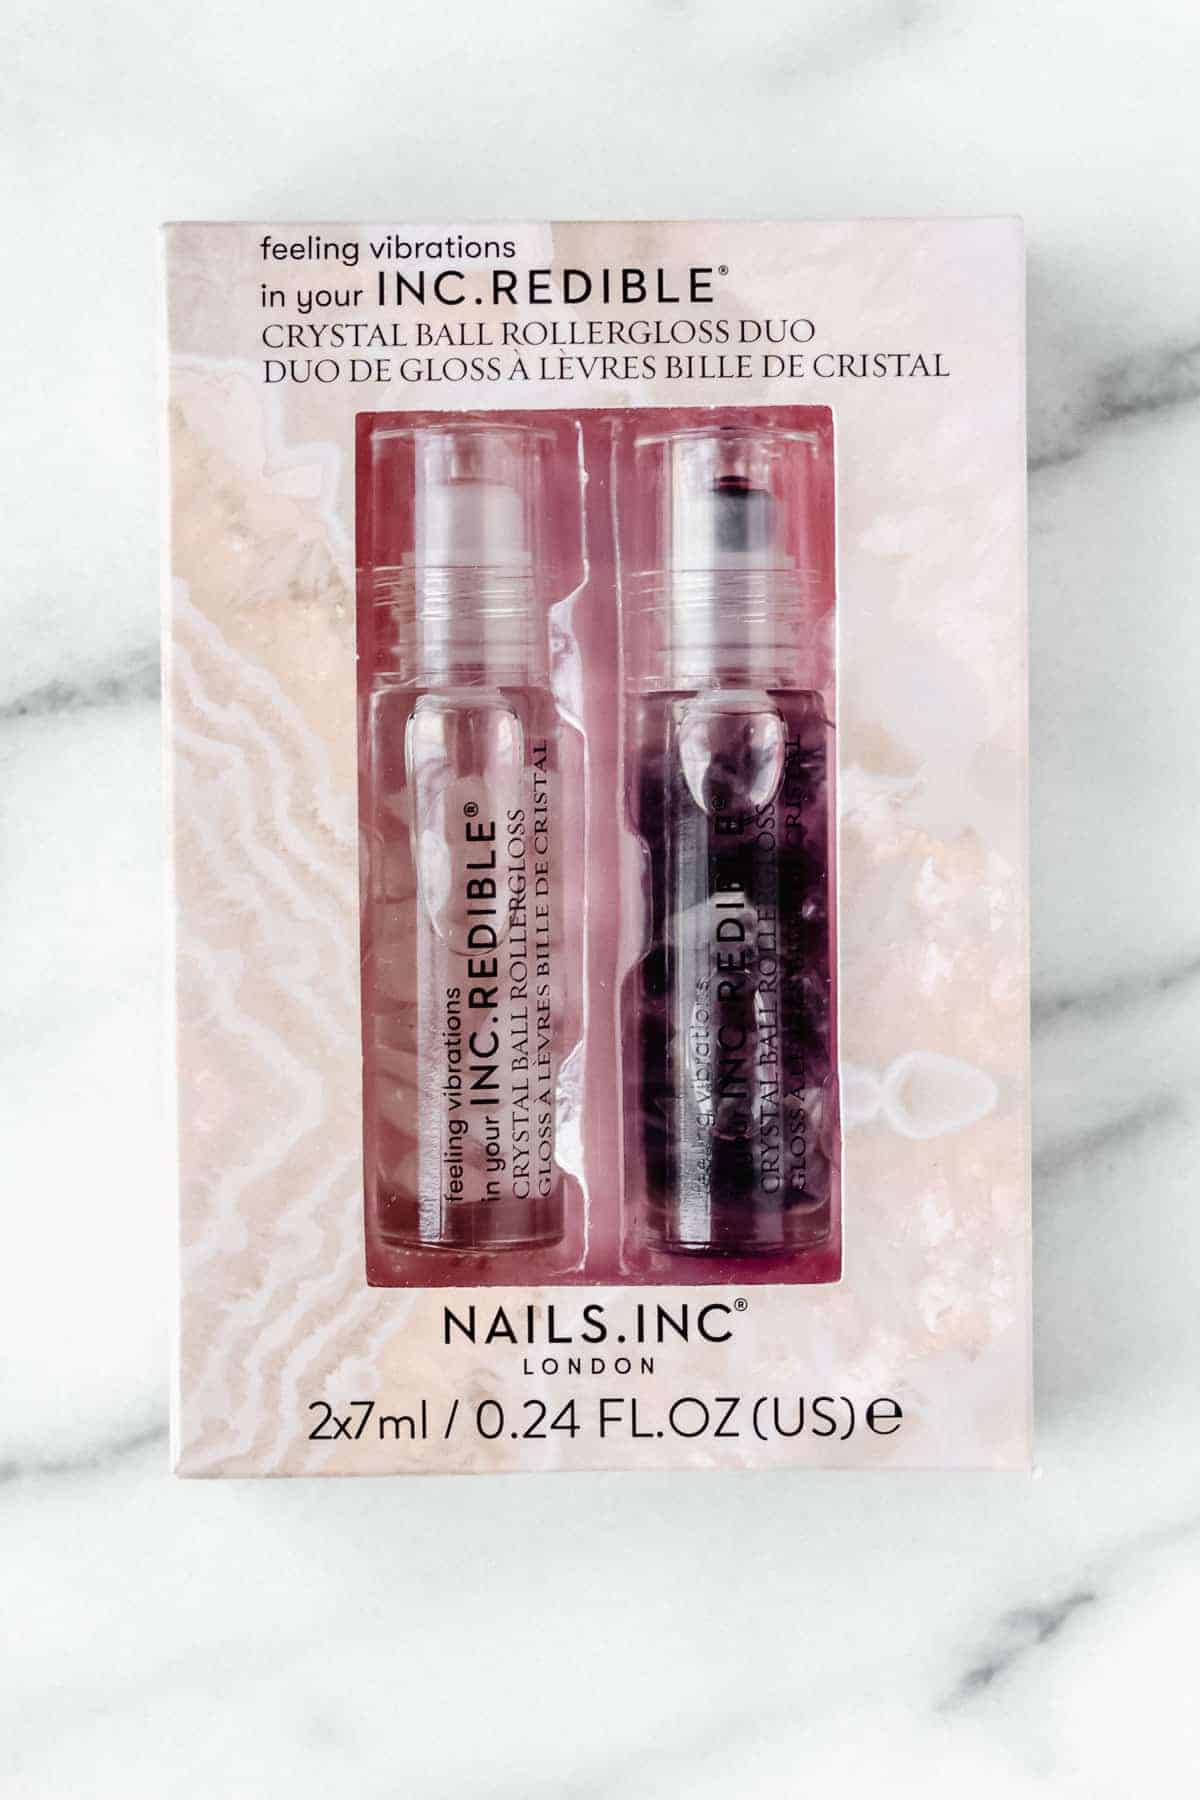 Nails Inc. Crystal Ball Rollergloss Duo in package on a marble backdrop